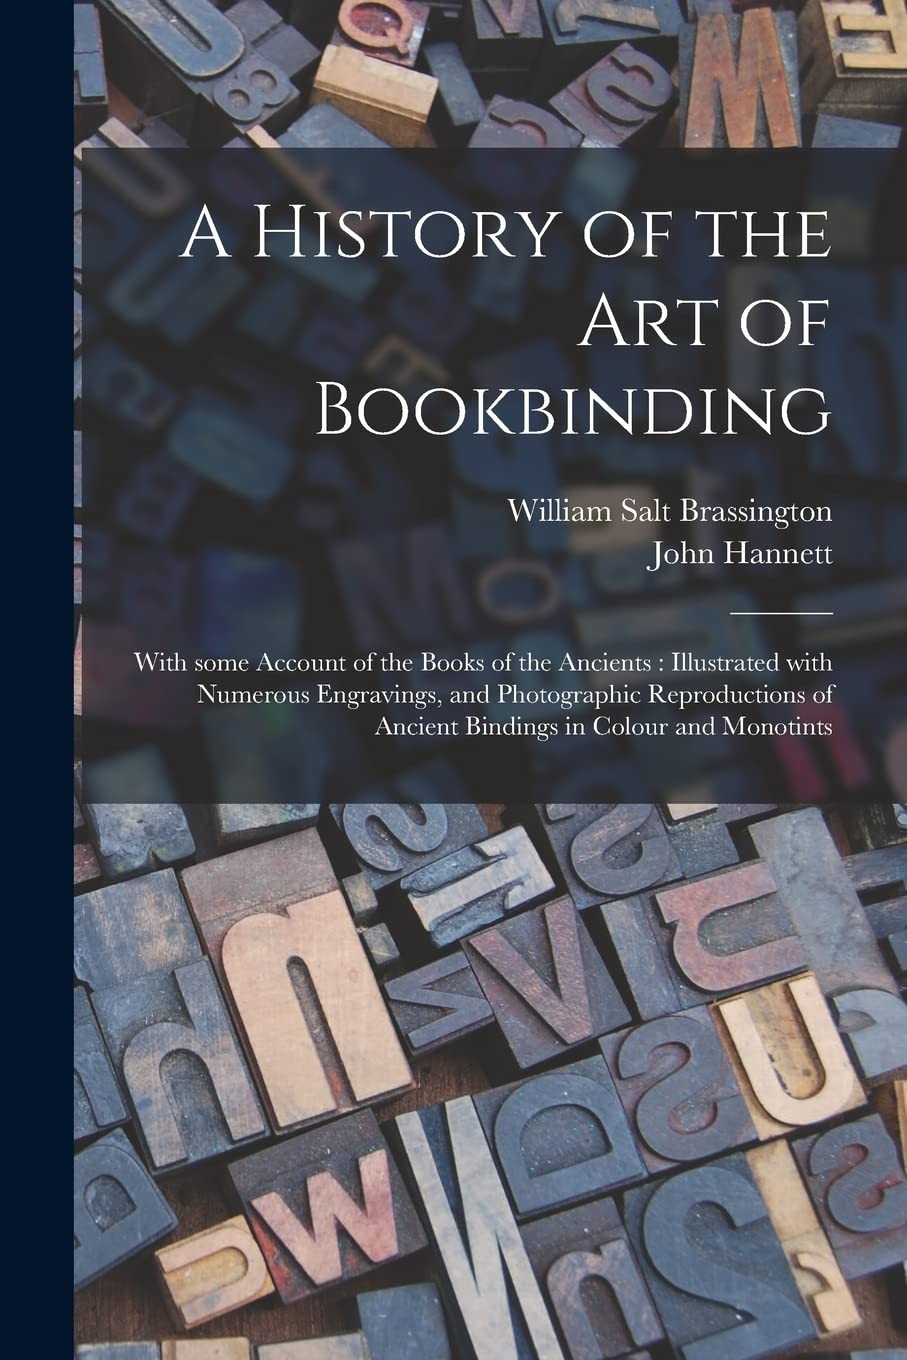 A History of the Art of Bookbinding: with Some Account of the Books of the Ancients: Illustrated with Numerous Engravings, and Photographic Reproductions of Ancient Bindings in Colour and Monotints